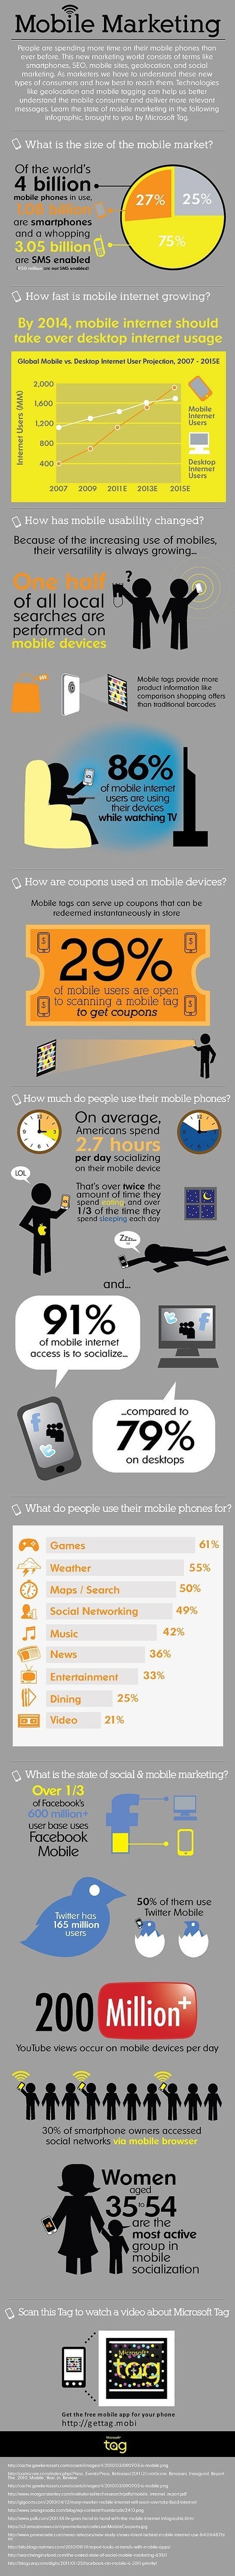 The Mobile Social Audience is Evolving - Here's What's Happening [Infographic] | Mobile Technology | Scoop.it